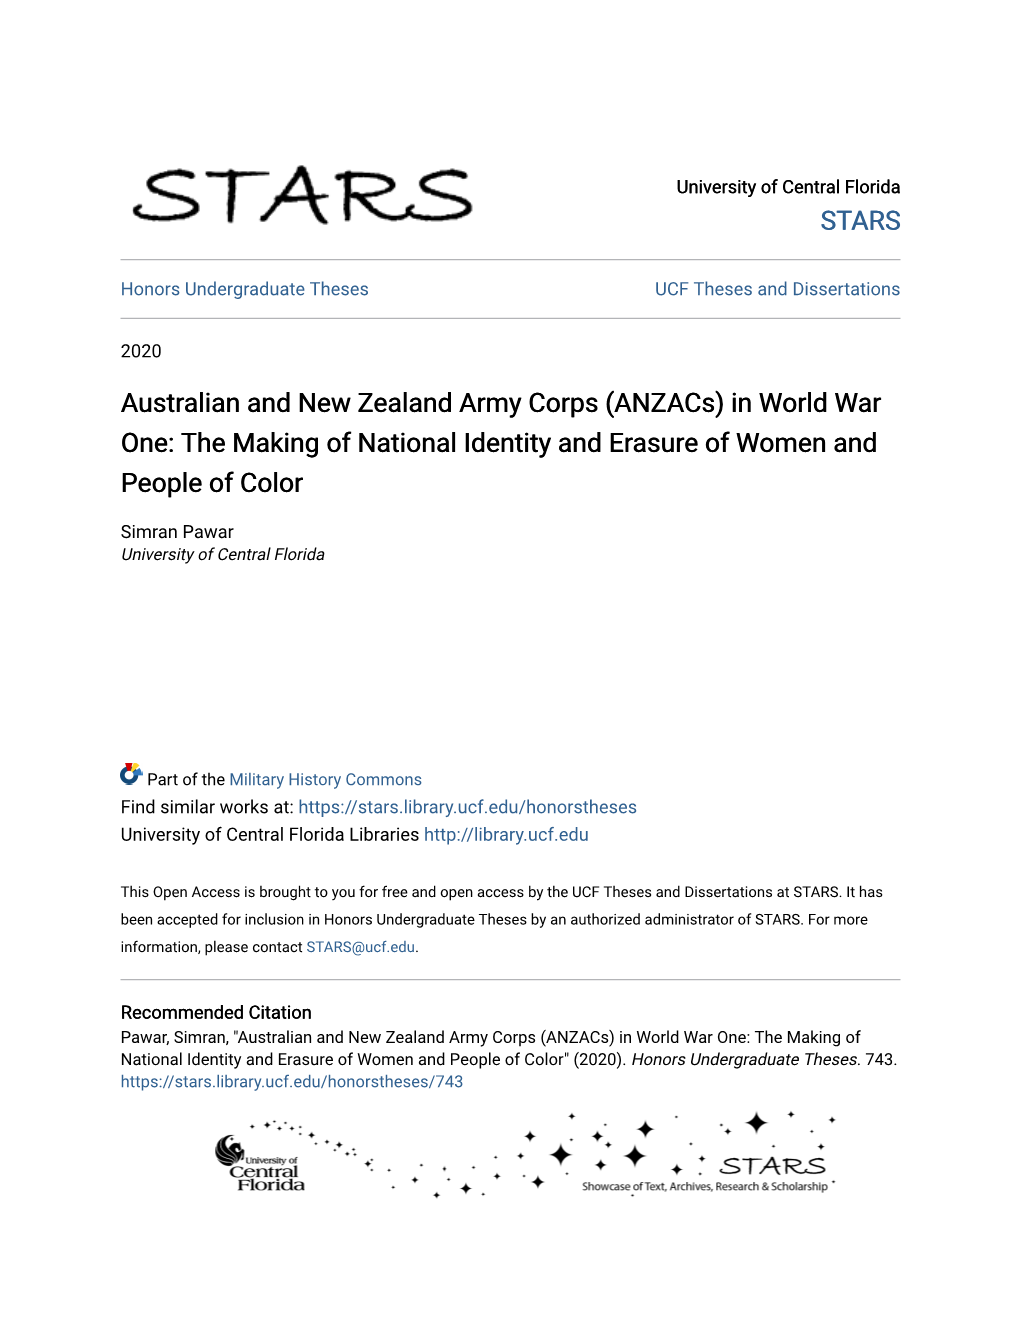 Australian and New Zealand Army Corps (Anzacs) in World War One: the Making of National Identity and Erasure of Women and People of Color